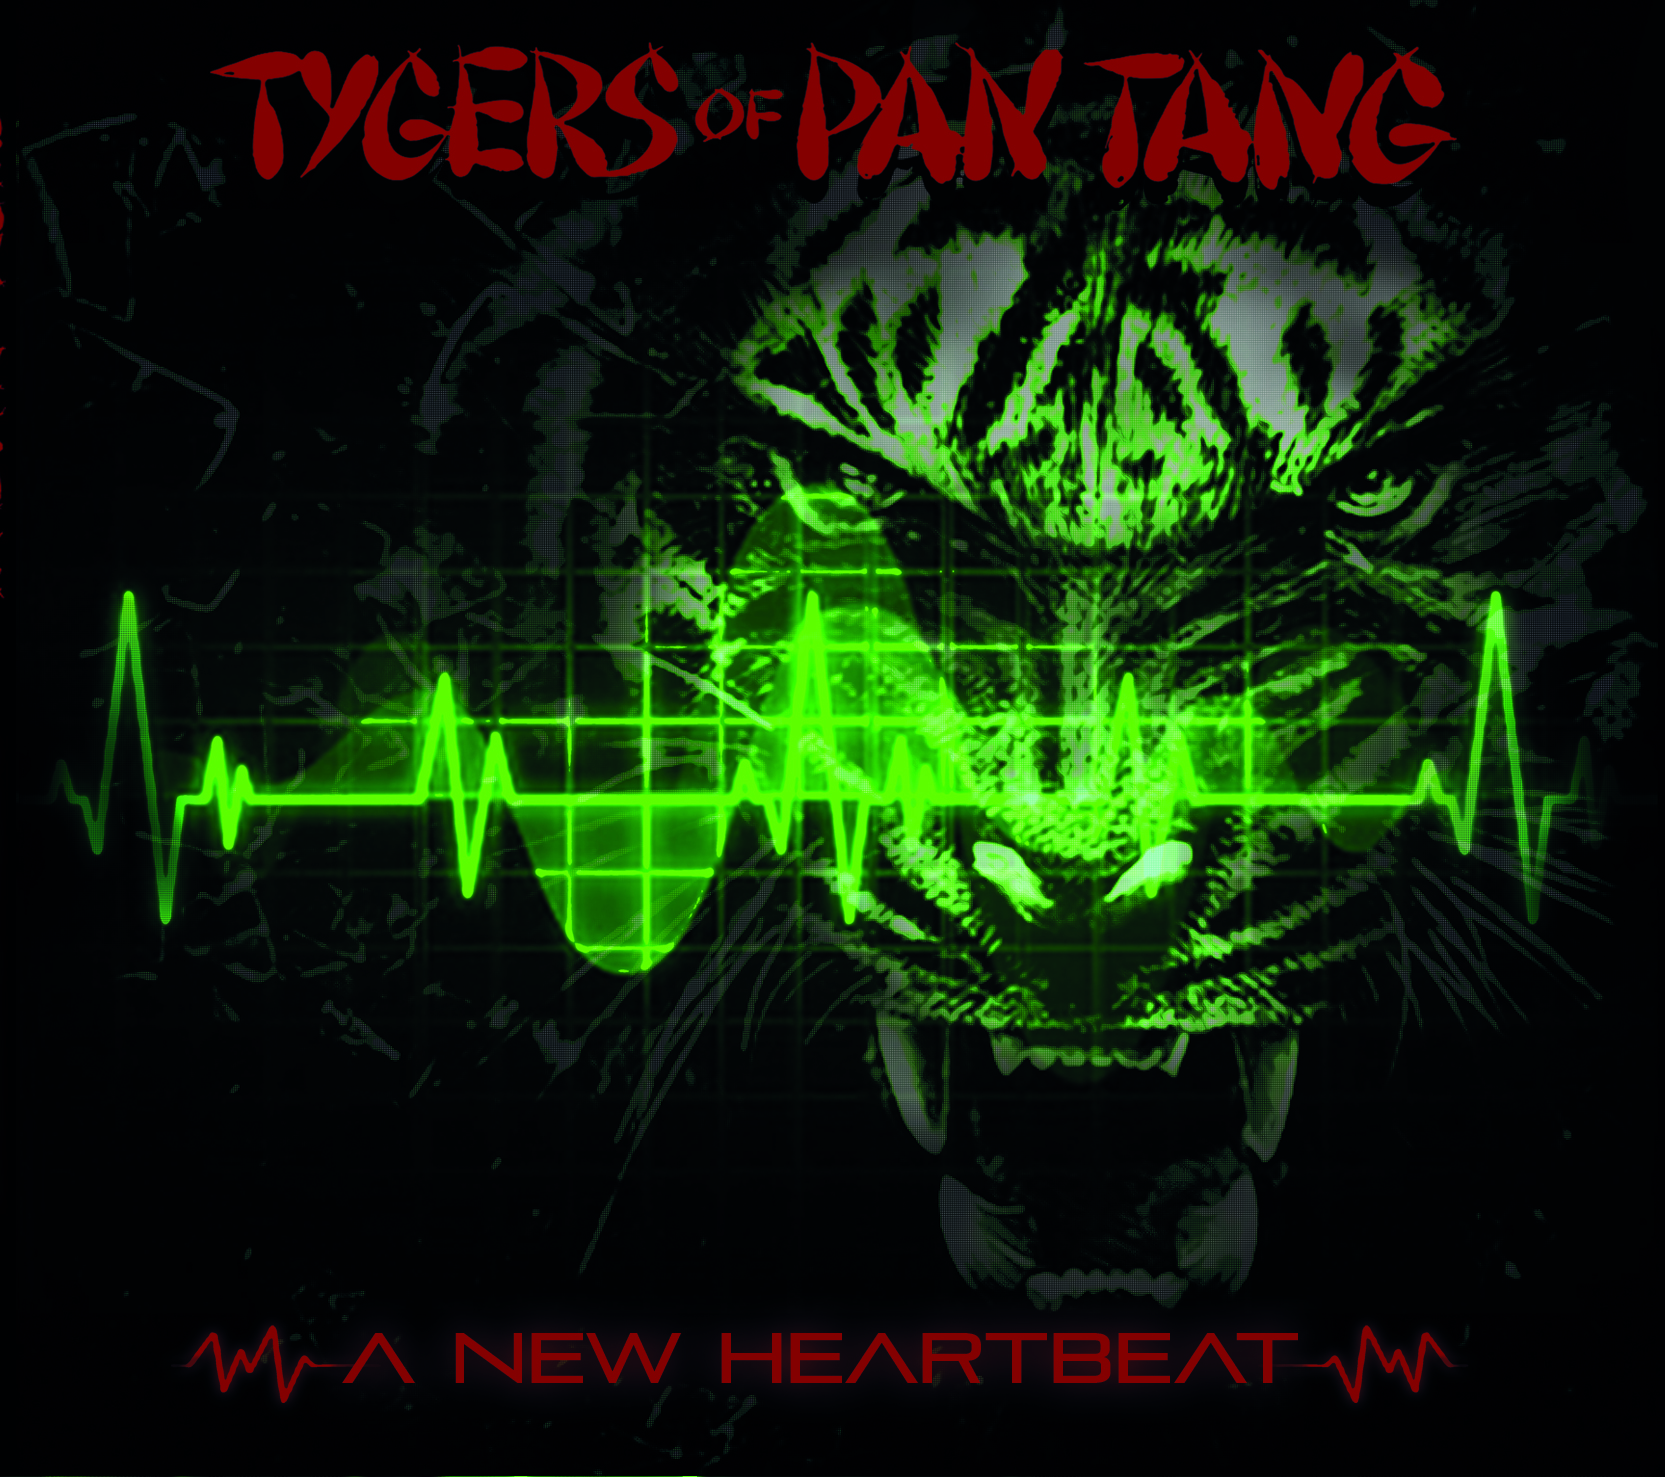 TYGERS OF PAN TANG – A New Heartbeat EP